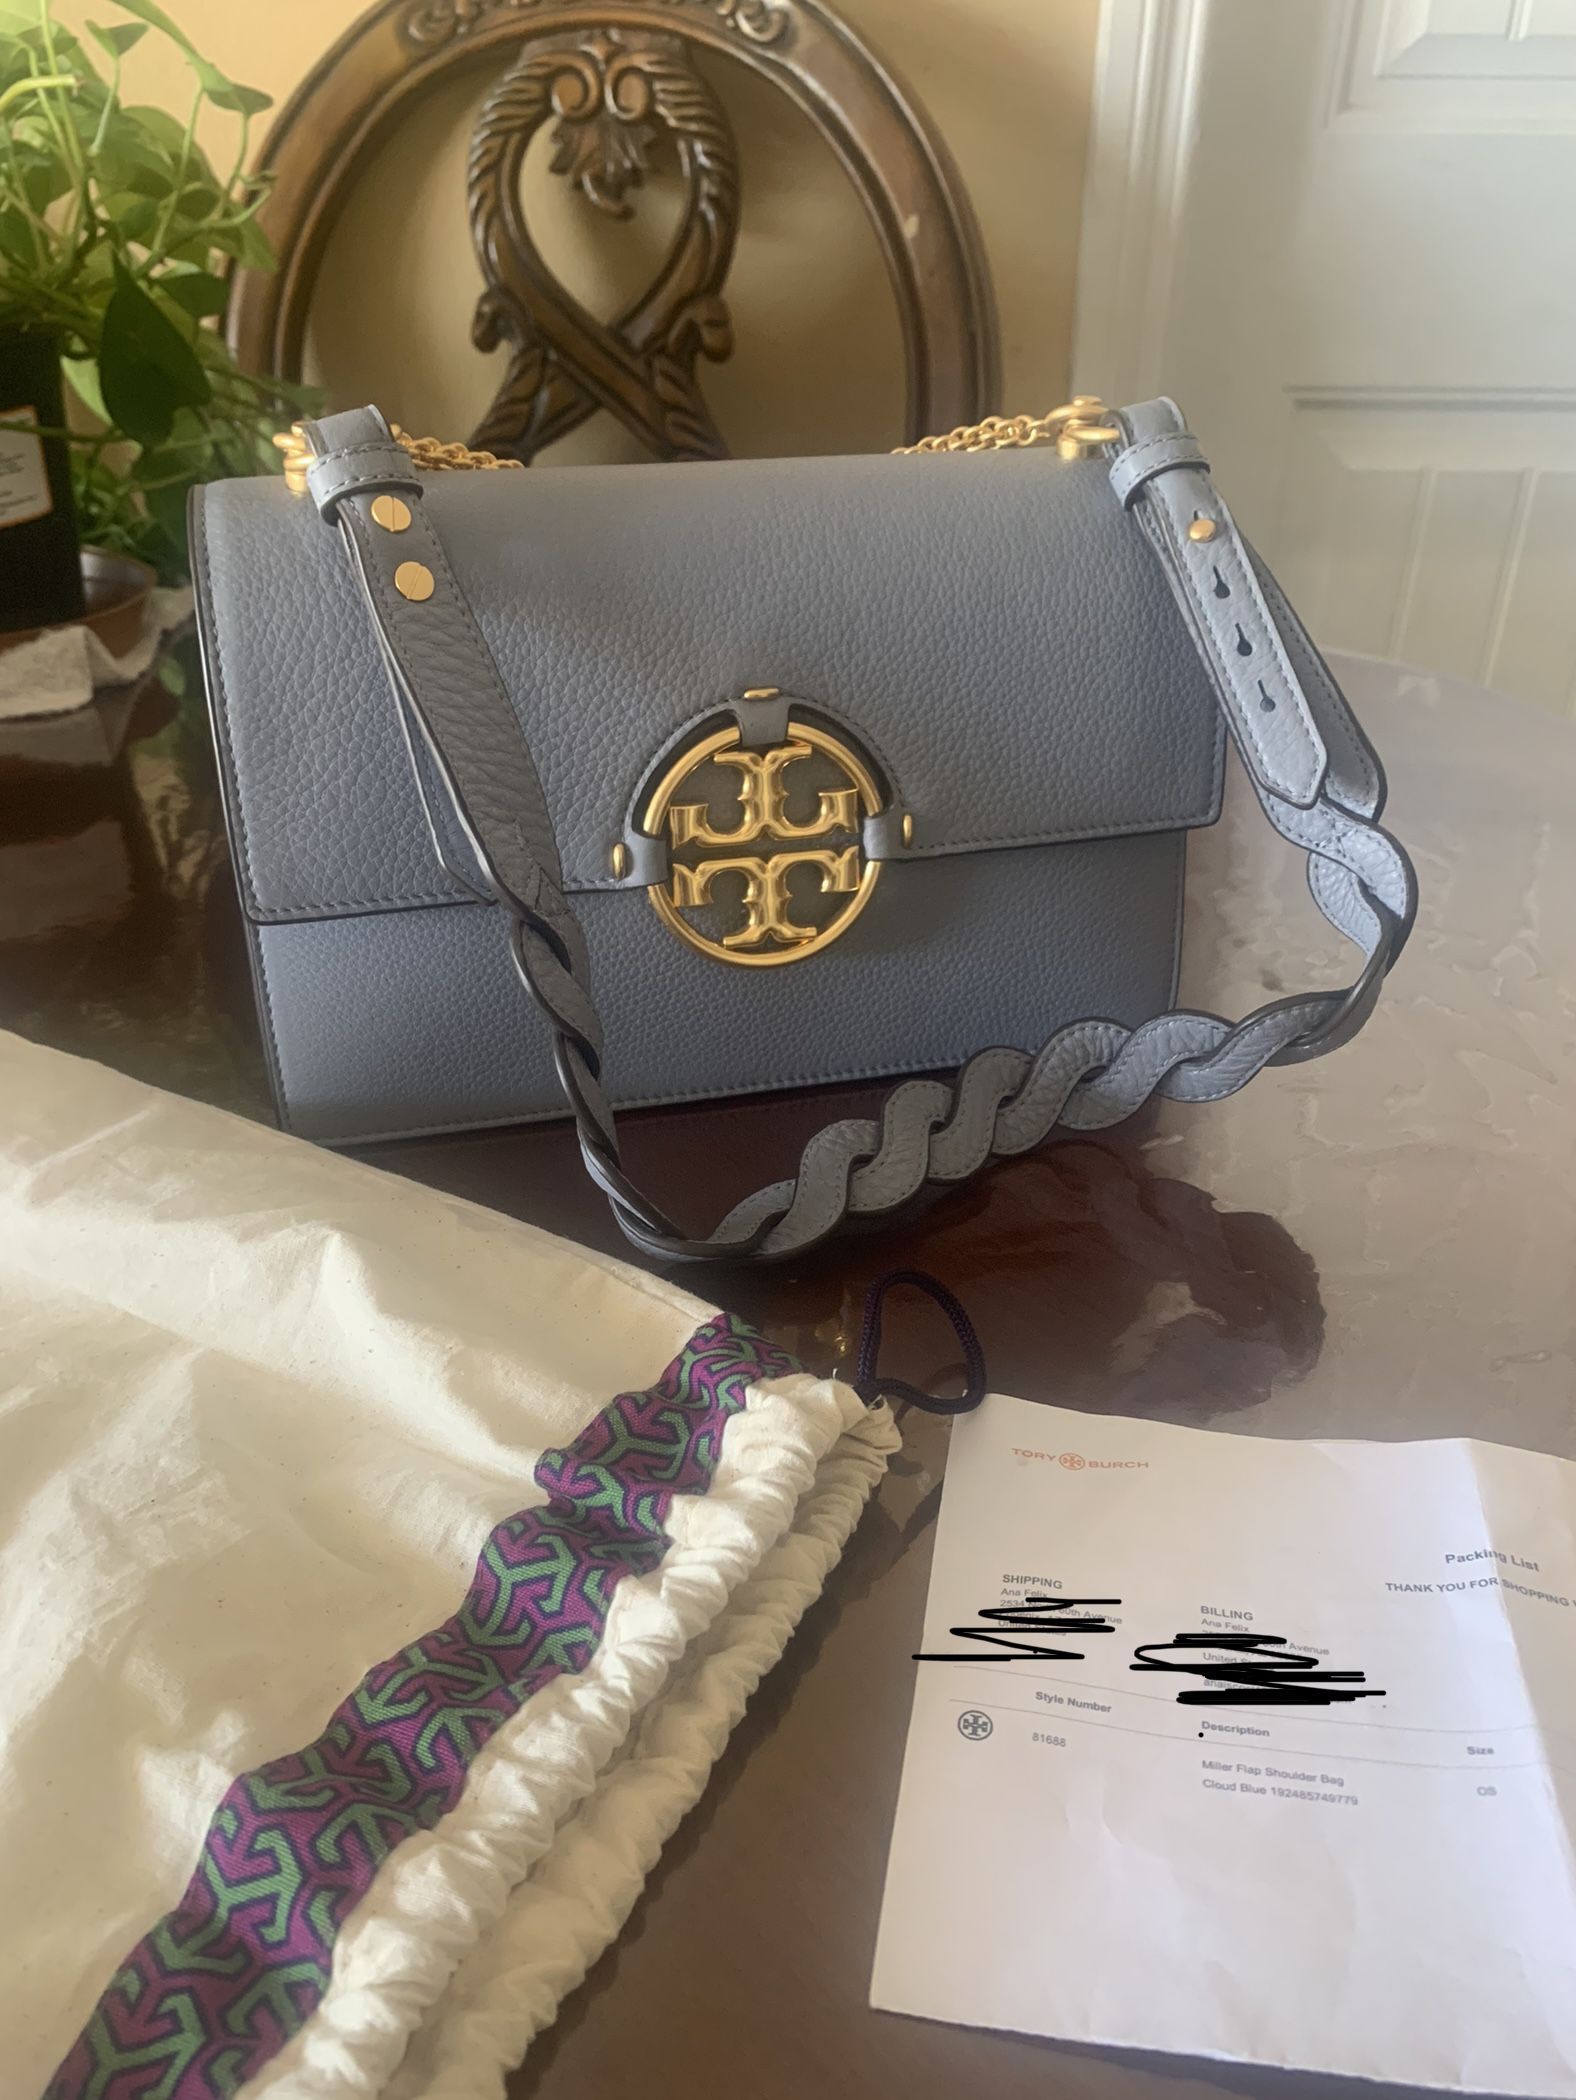 Tory Burch small Robinson Tote in Cardamom for Sale in Phoenix, AZ - OfferUp